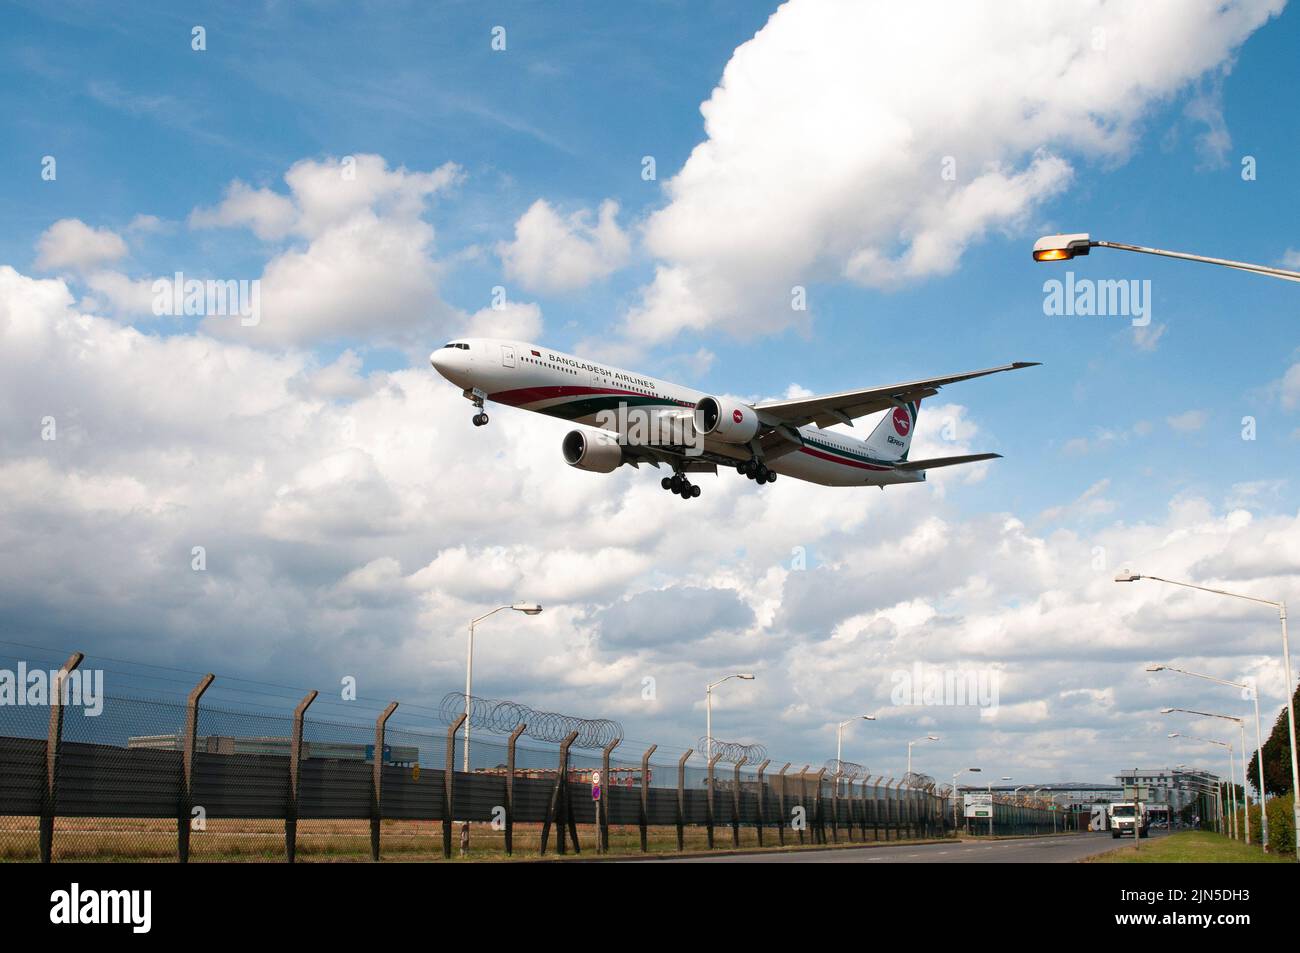 London, UK - August 09, 2022 - Bangladesh Airlines airplane cross the street while landing at Heathrow airport Stock Photo